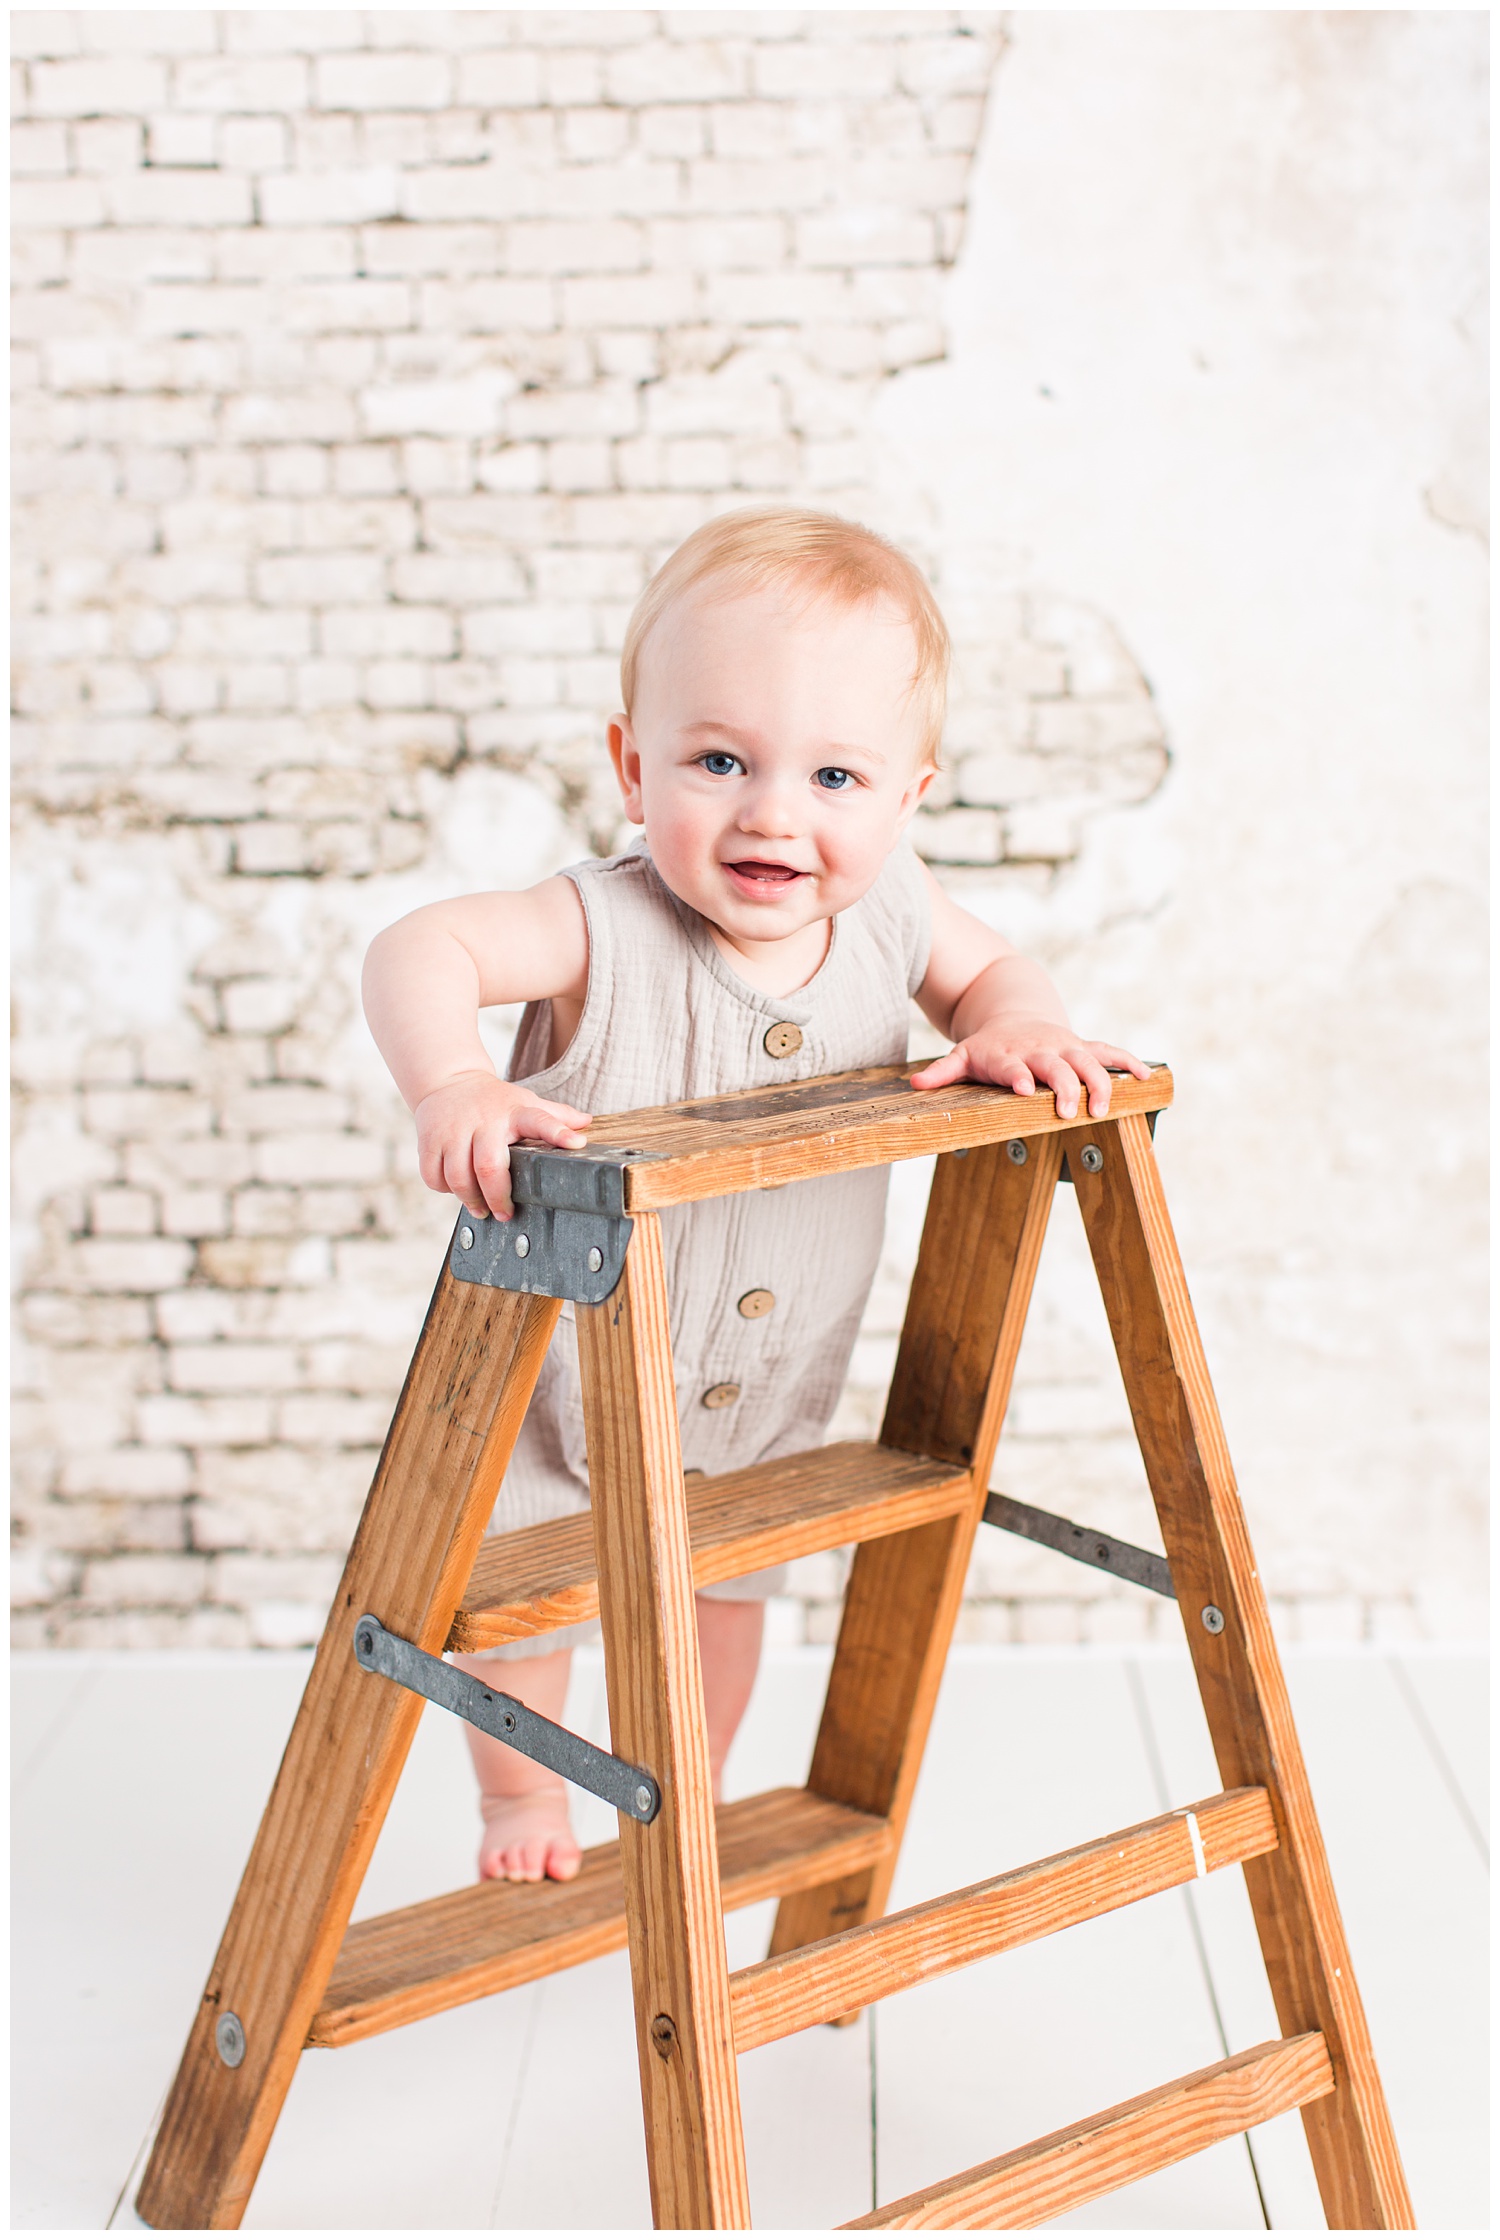 Baby Cullen poses on a wooden ladder in a gray vintage romper for his first birthday.